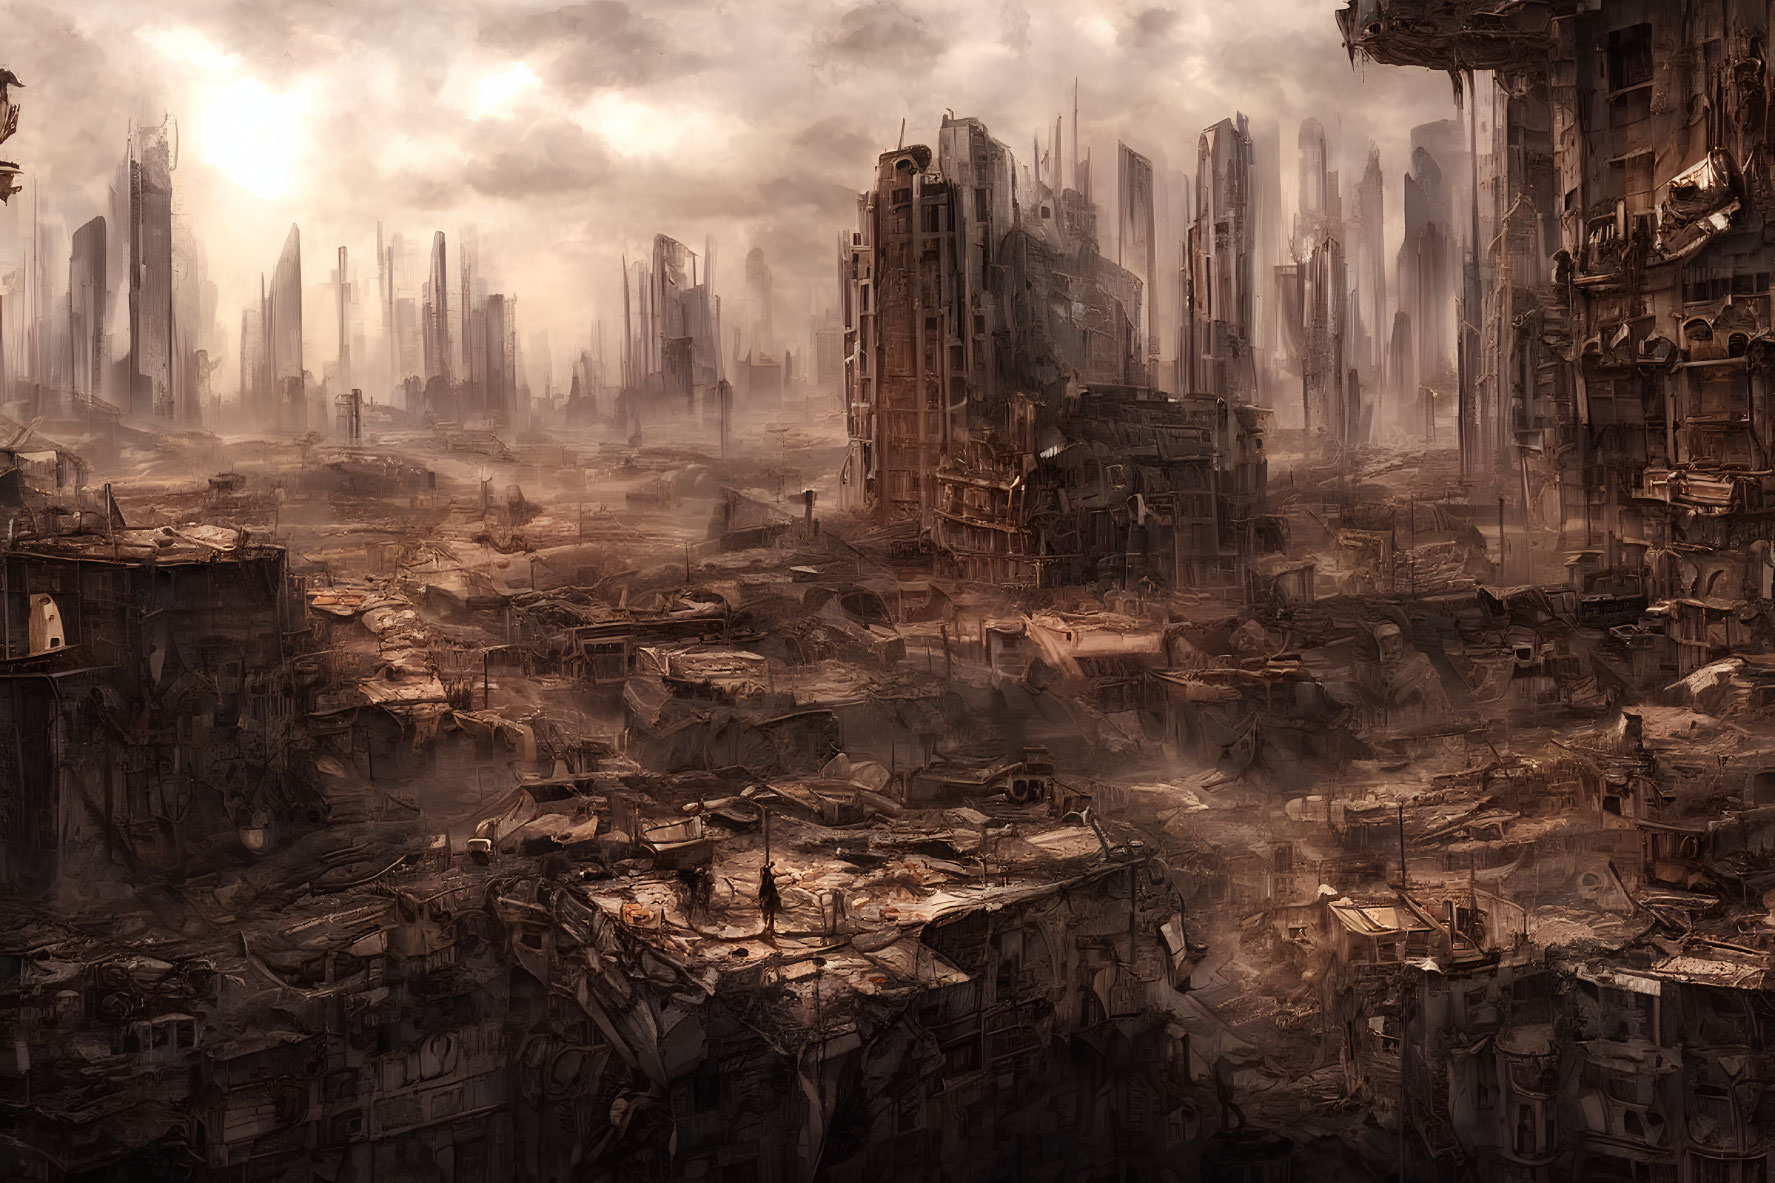 Dystopian cityscape with crumbling buildings in vast wasteland